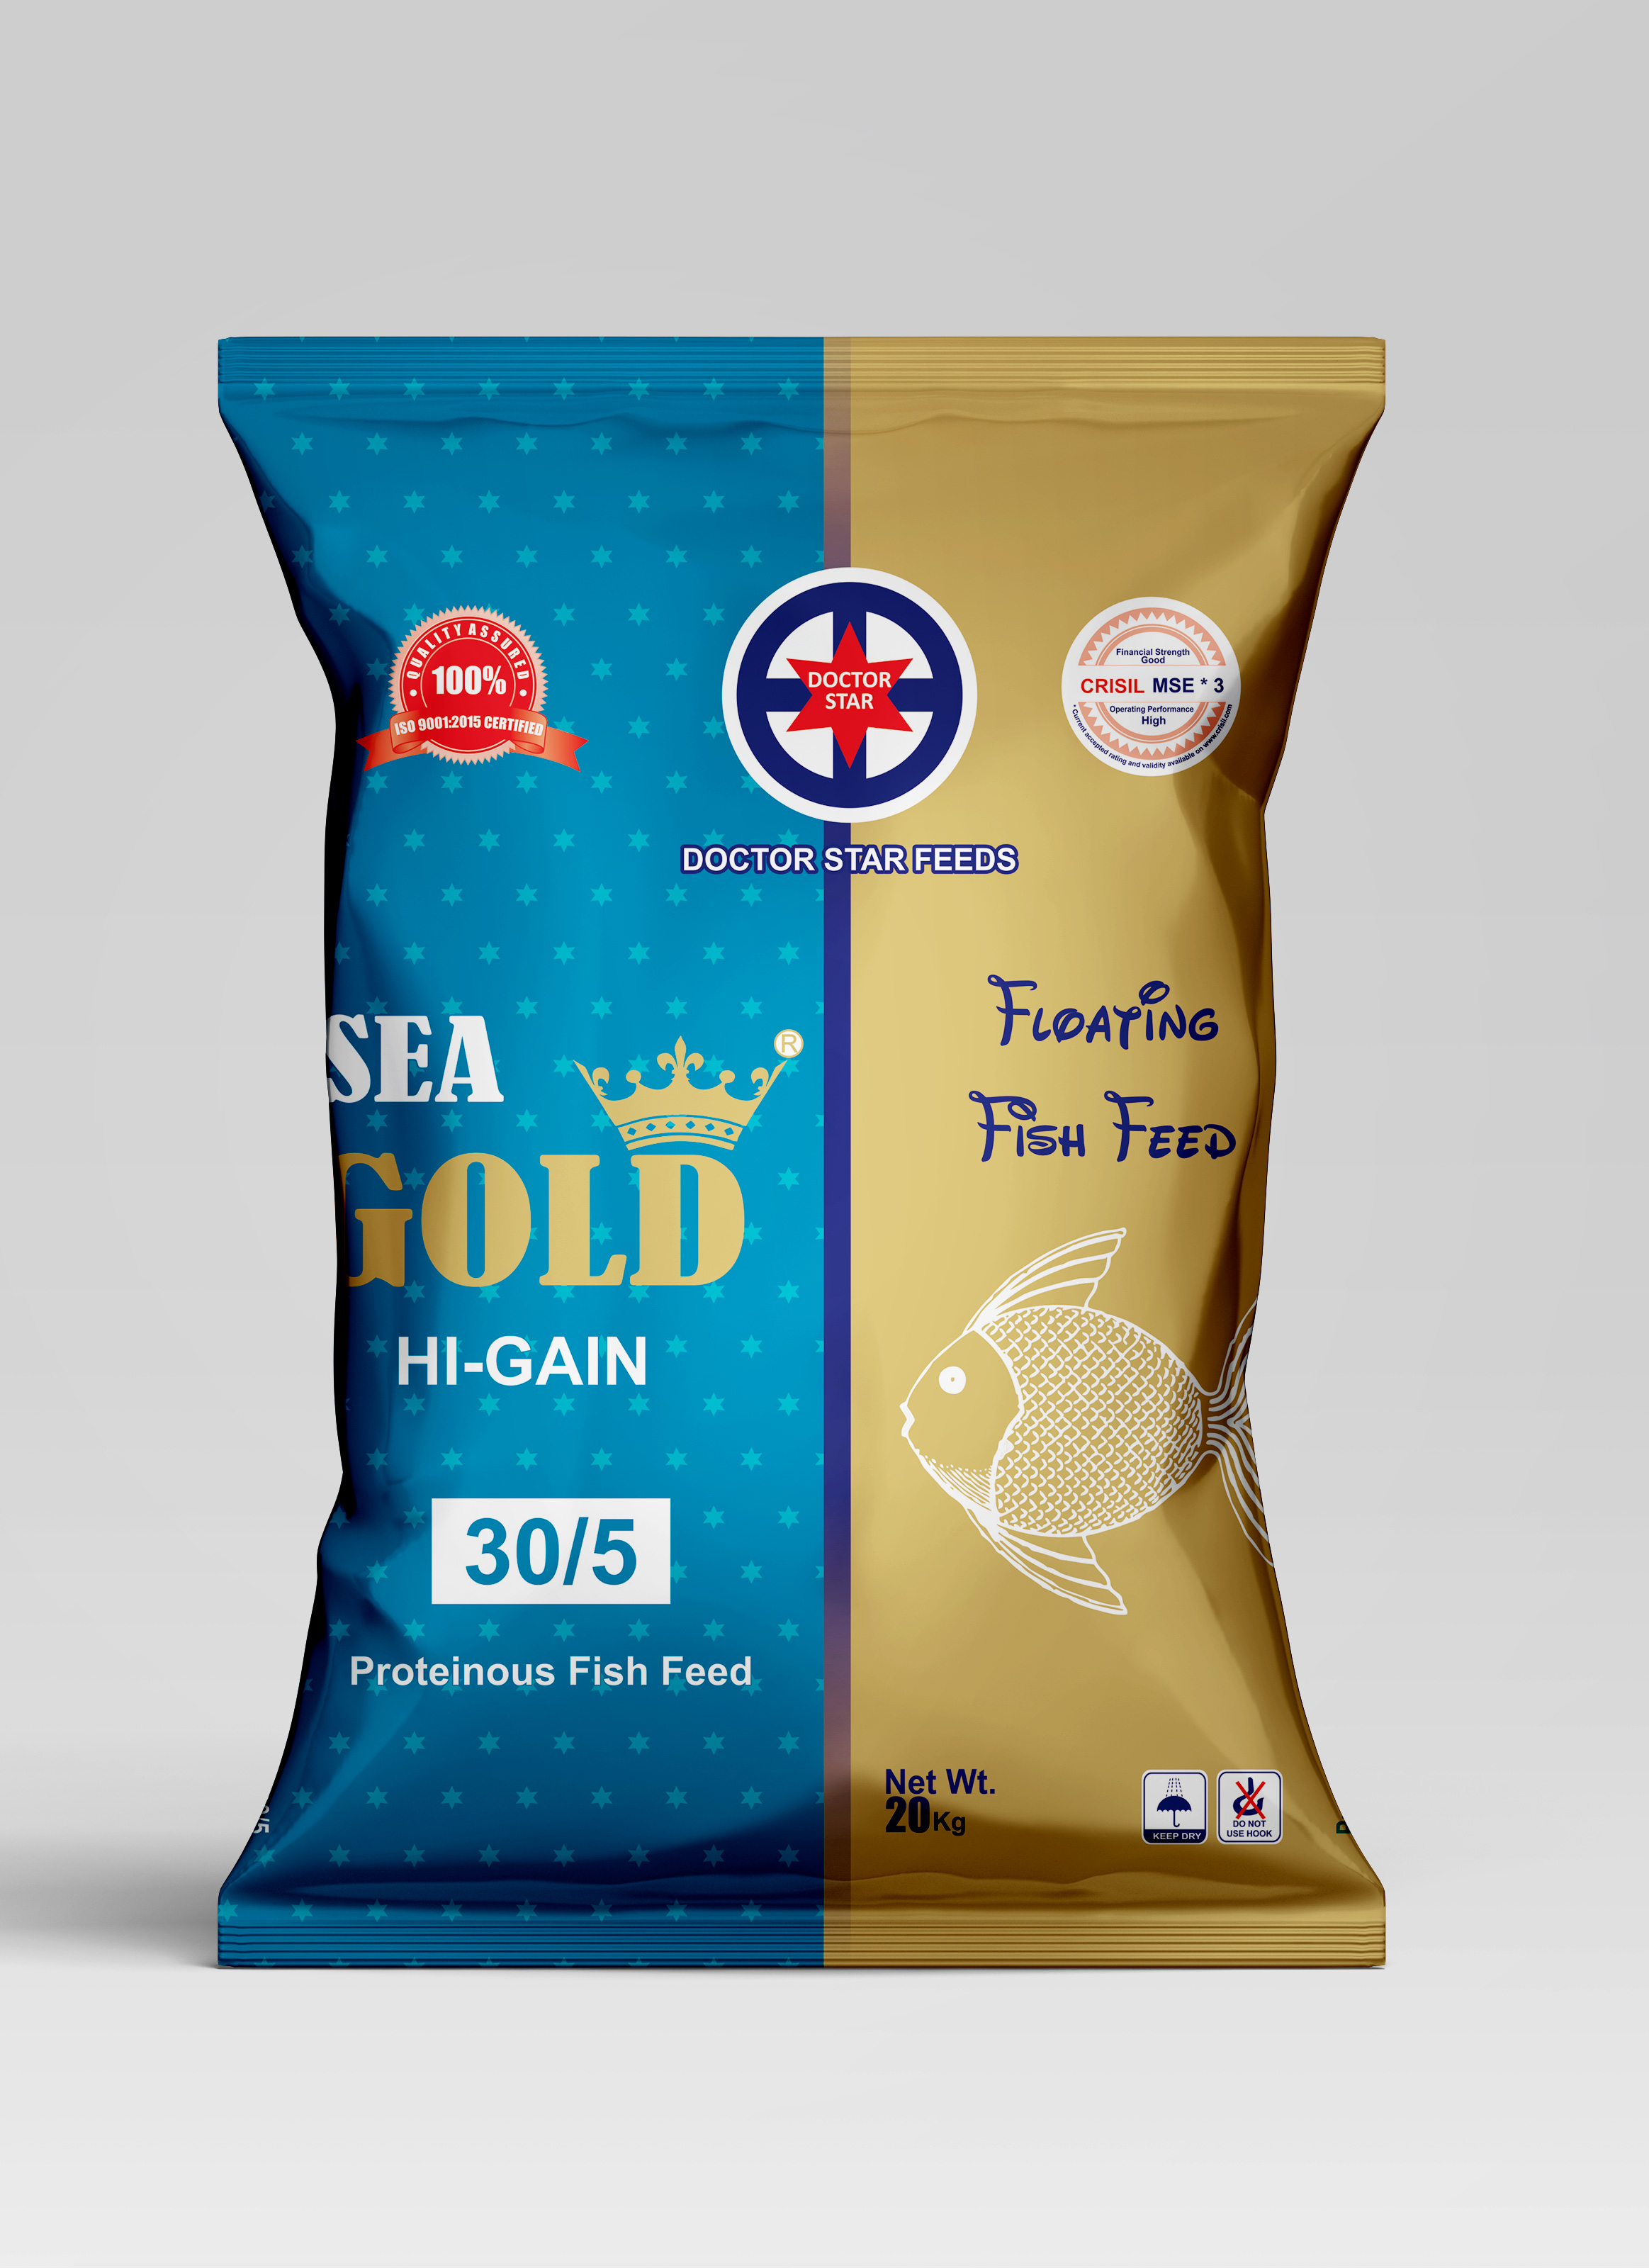 FLOATING AND SINKING FISH FEED from MEGATAJ AGROVET PVT LTD